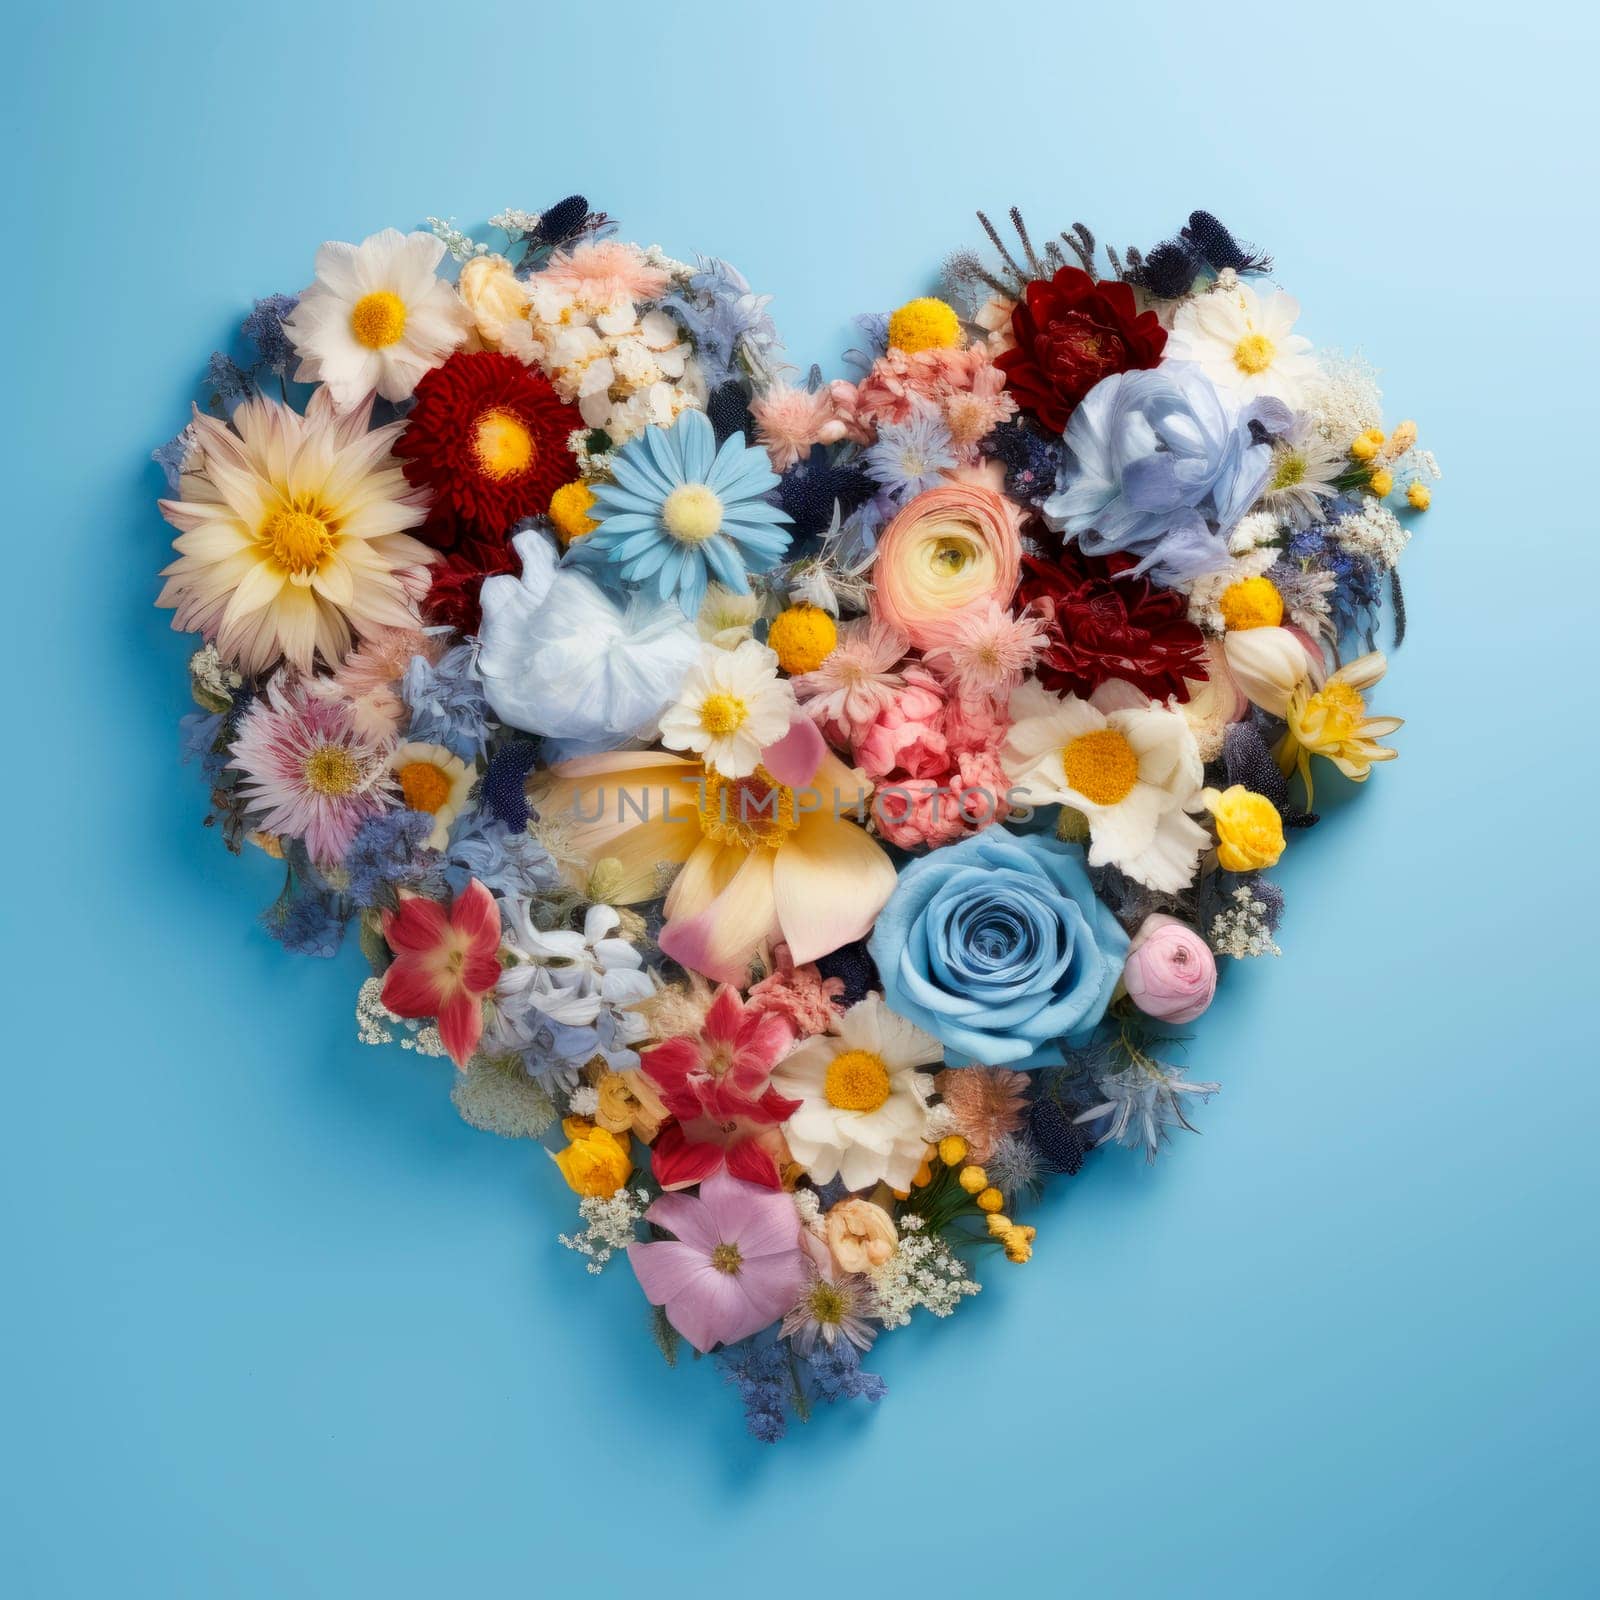 The heart is lined with beautiful multicolored flowers on a blue background by Spirina